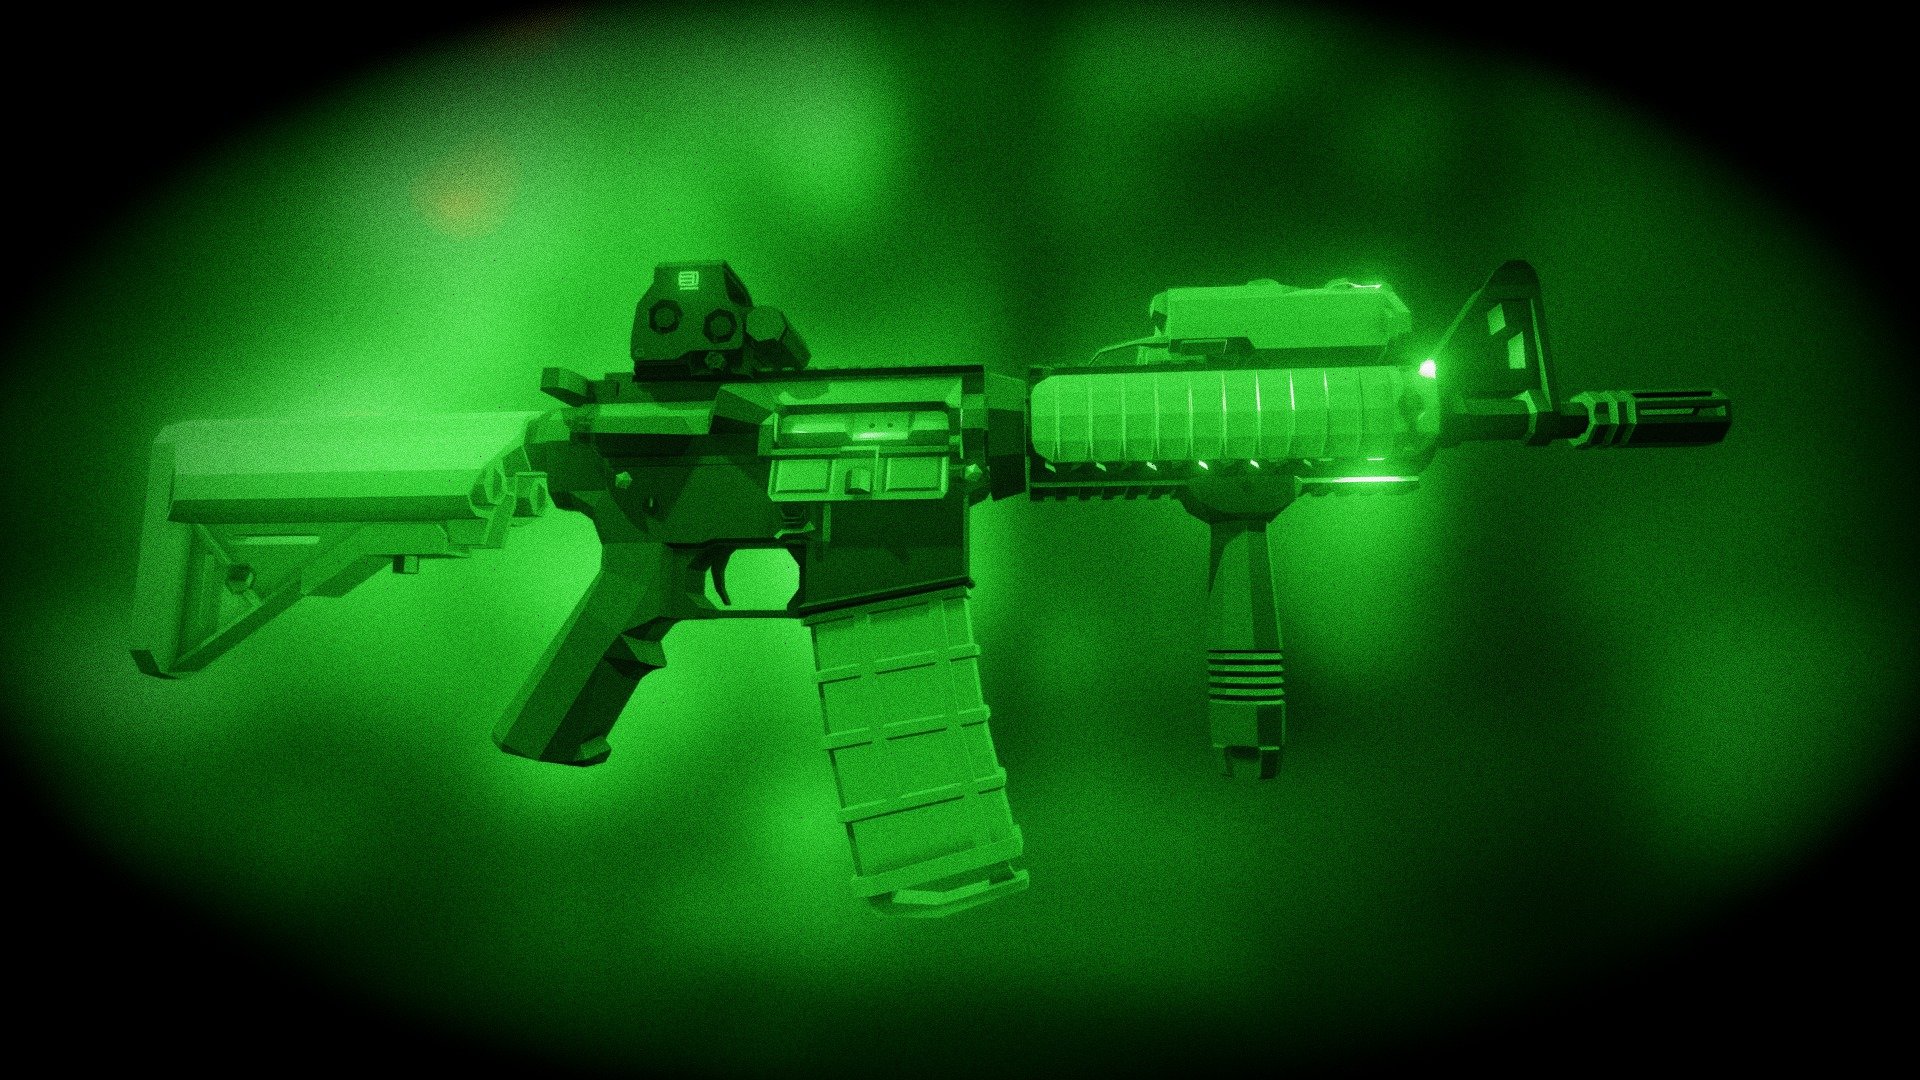 basically the same Mk18 mod0 I already uploaded, but as you'd see it actually in military use, with an EOTech EXPS2, a PEQ-15 tactical device, a magpul PMAG Gen M3, a desert tan coloured stock and rail cover/grip plates.

also, I added a cool night vision like effect to the model preview window, hope you like it! - Low-Poly Mk18 Mod0 full loadout - Download Free 3D model by notcplkerry 3d model